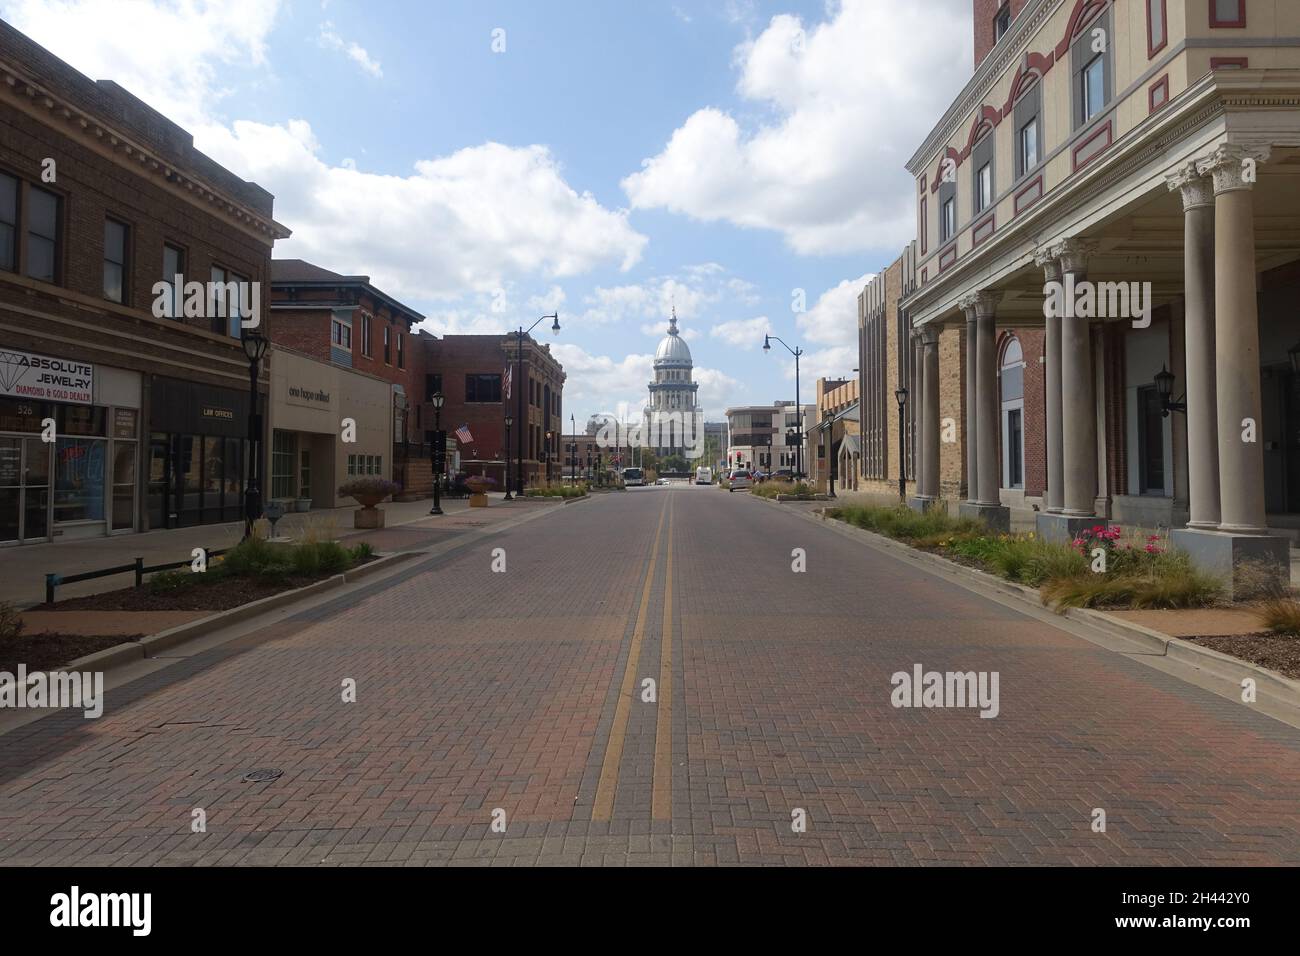 Springfield Illinois home of Abraham Lincoln Stock Photo